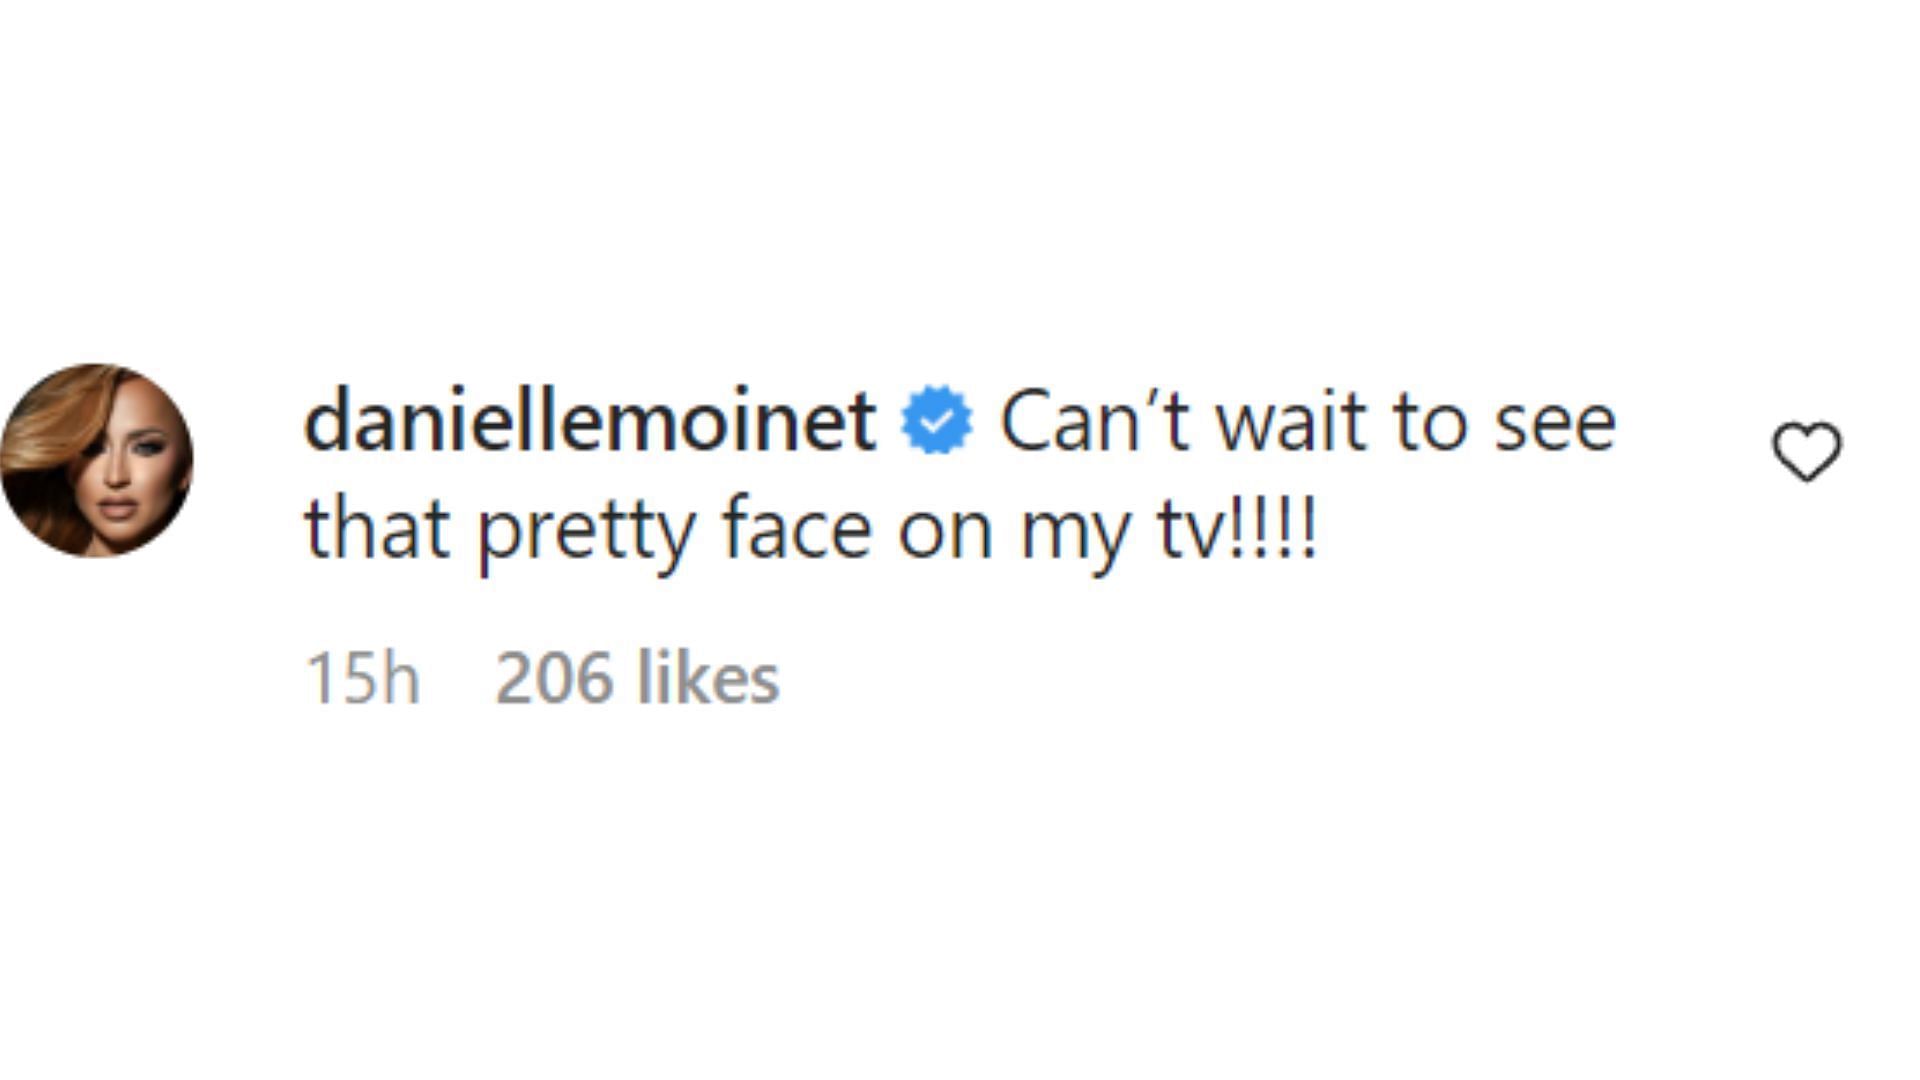 WWE Diva Danielle Moinet (Summer Rae) was one of the most enthusiastic comments.